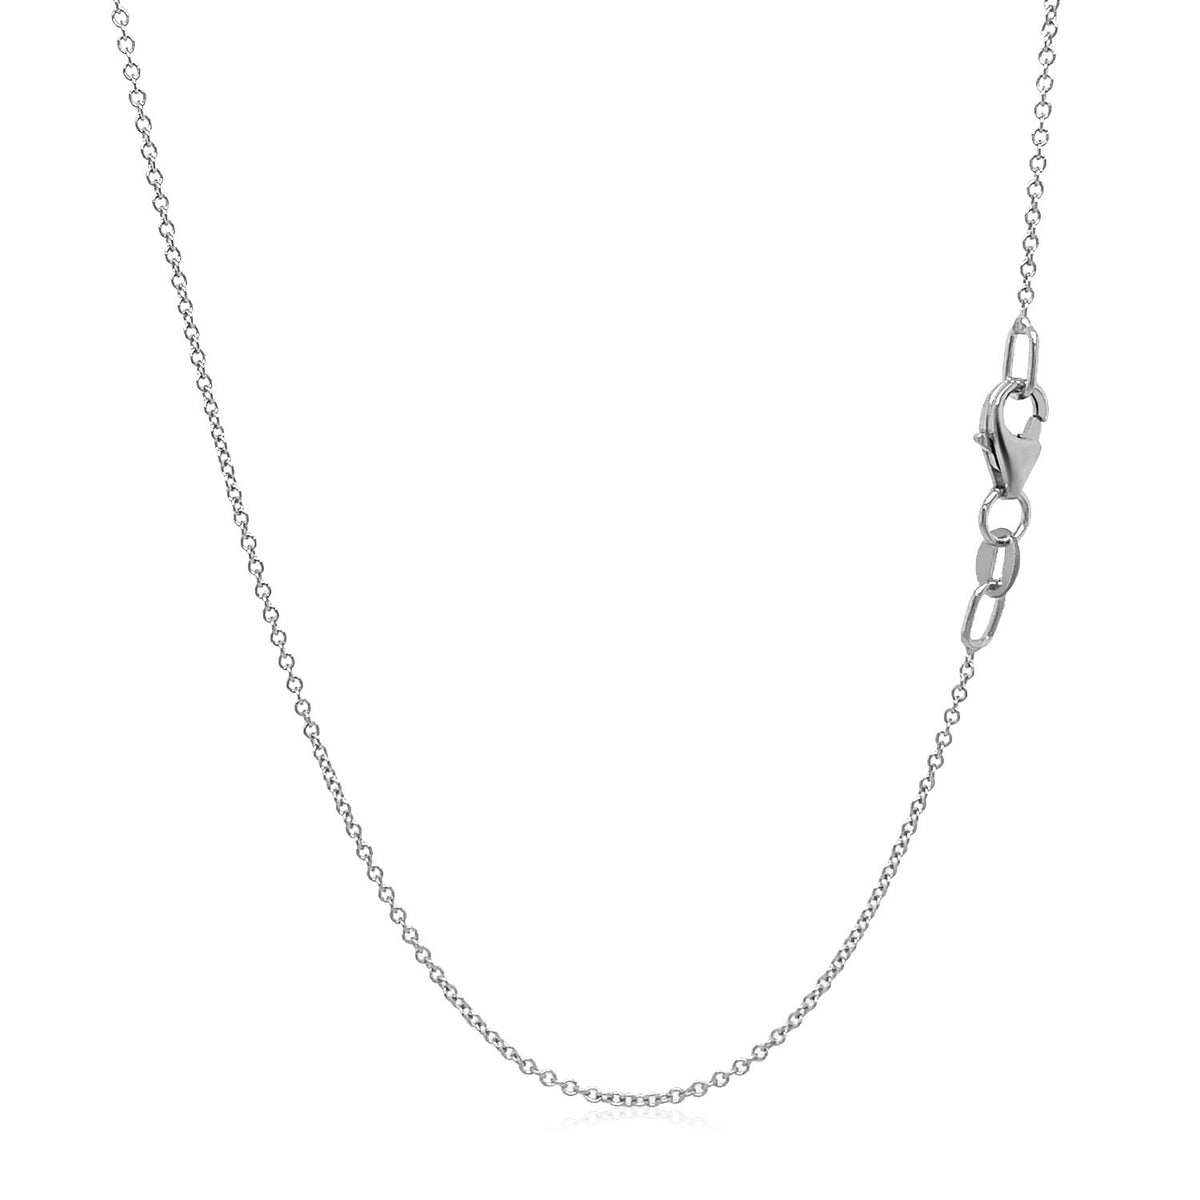 Double Extendable Cable Chain - 14k White Gold 1.00mm